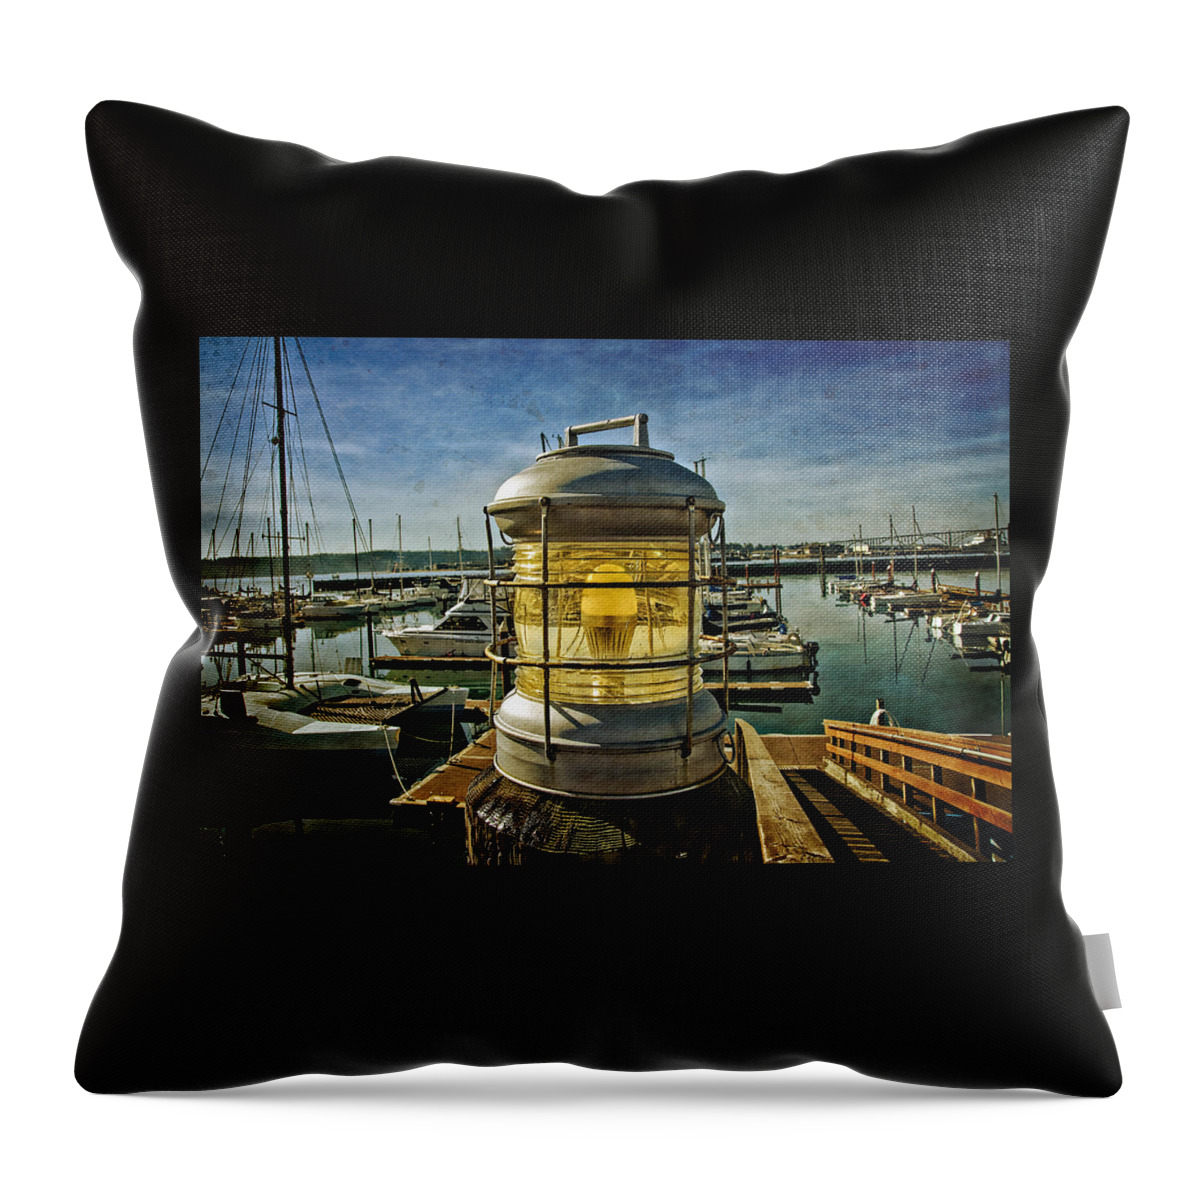 Bays Throw Pillow featuring the photograph The Lamp At Embarcadero by Thom Zehrfeld